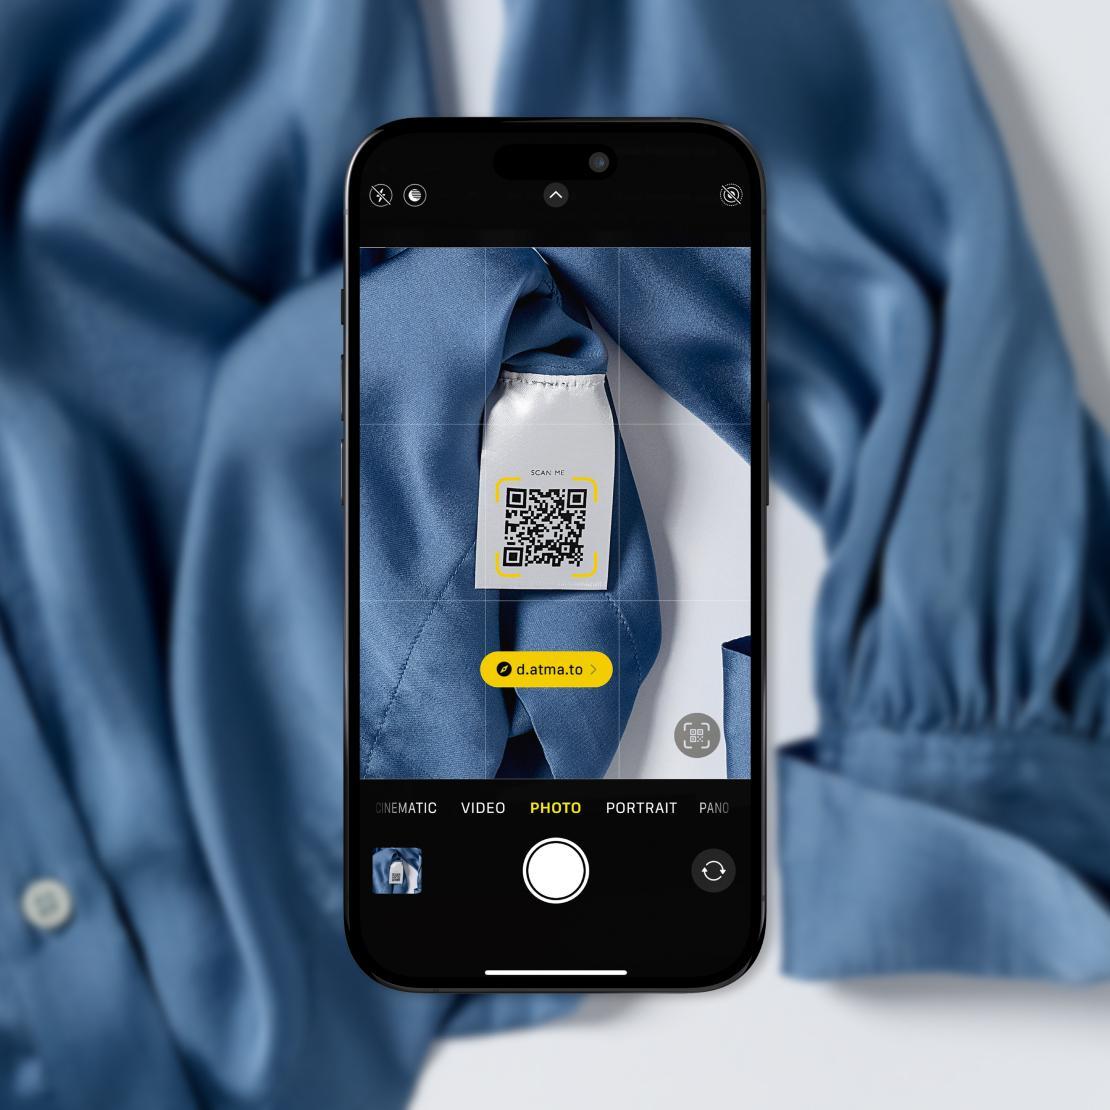 phone scanning  a QR digital trigger leading to atma.io connected product cloud